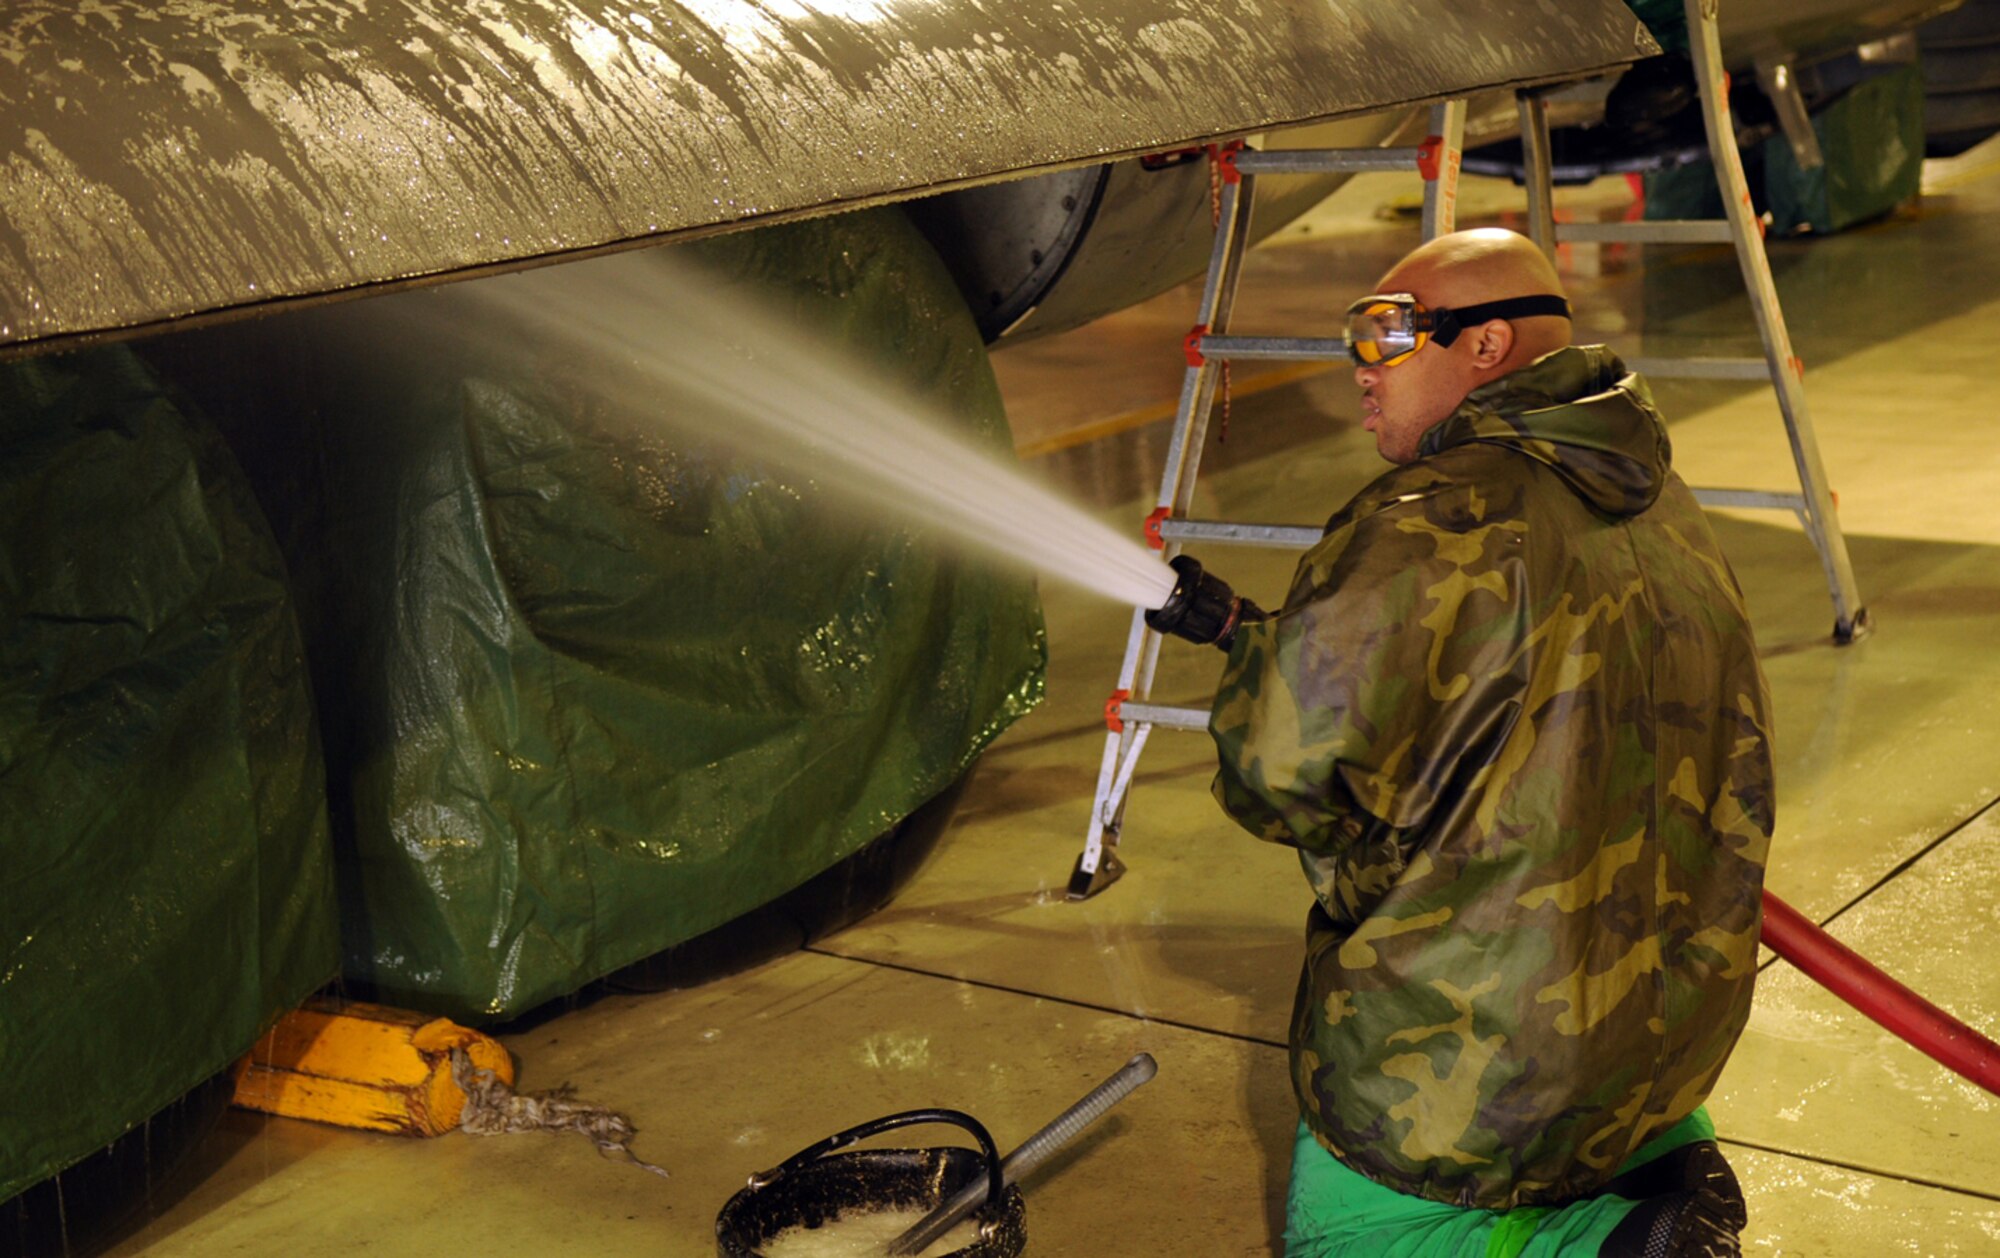 Senior Airman Darrell Bradford, 86th Aircraft Maintenance Squadron crew chief, hoses down a C-130E Hercules in Hangar 1 Ramstein Air Base, Germany, Oct. 28, 2008. The wash crew is made up of a 12-member team from the 86th AMXS who wash aircraft every 90 days to keep them mission ready. (U.S. Air Force photo by Airman 1st Class Scott Saldukas)